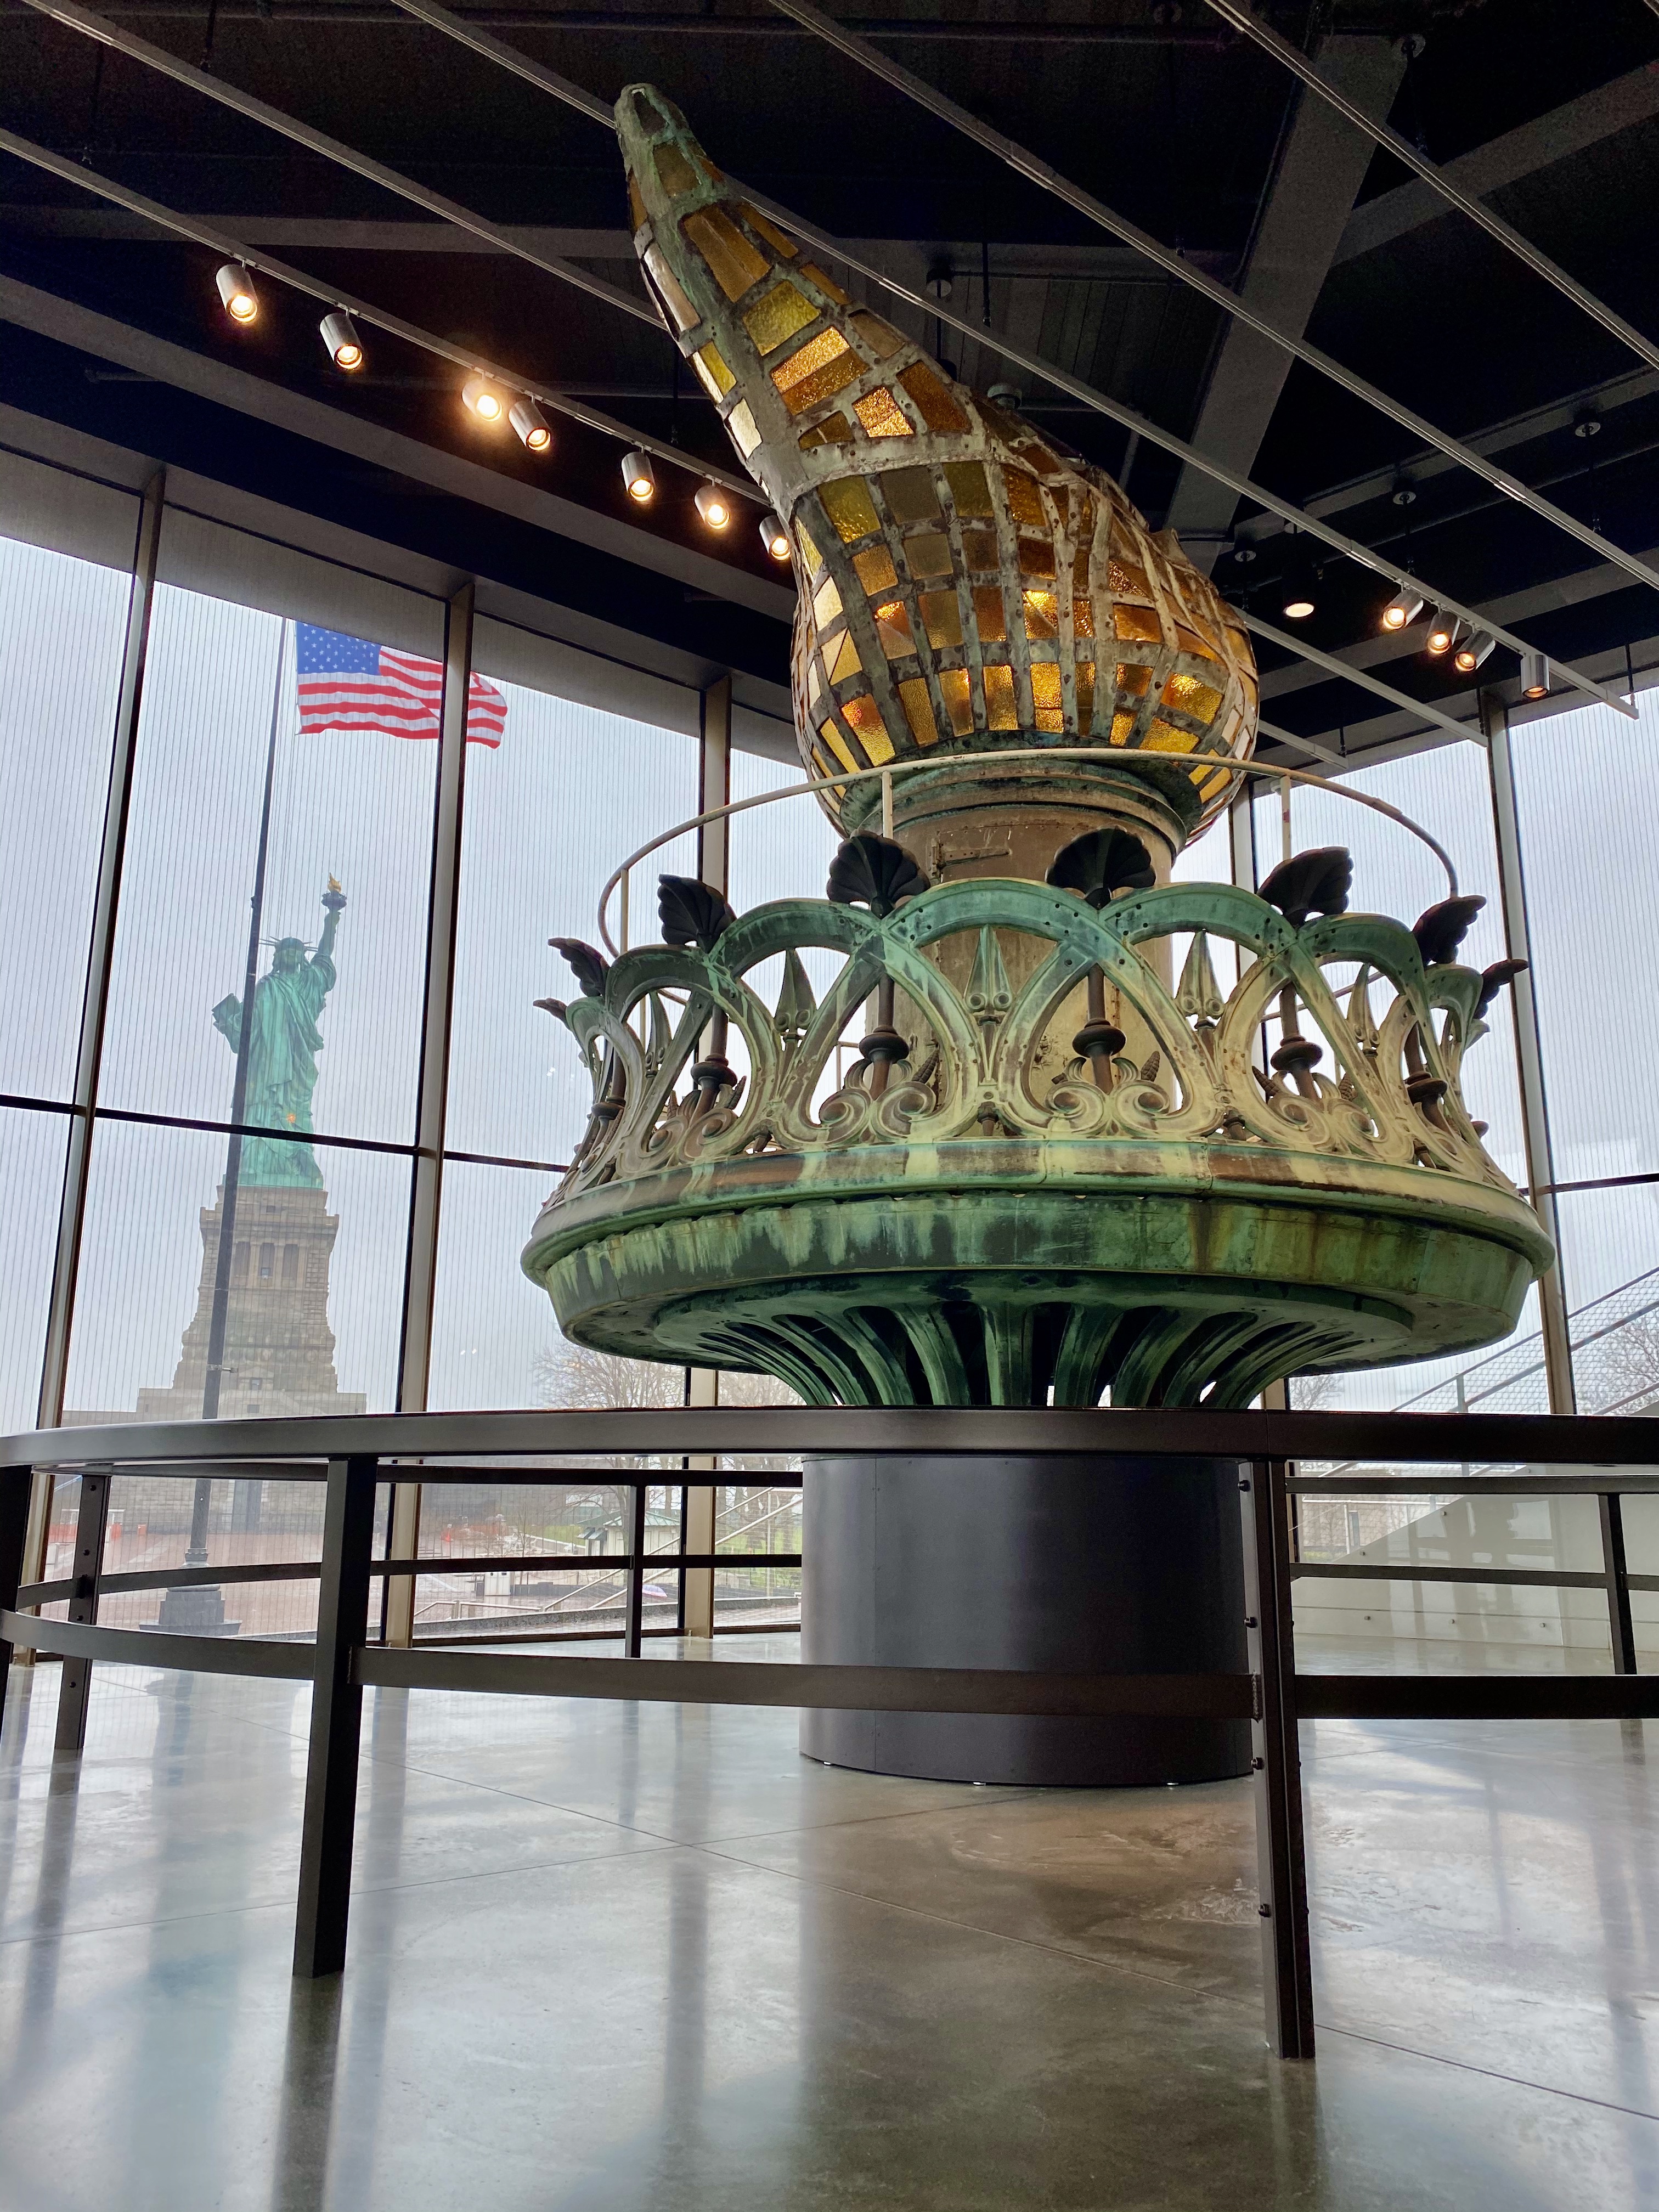 Tips for visiting Statue of Liberty